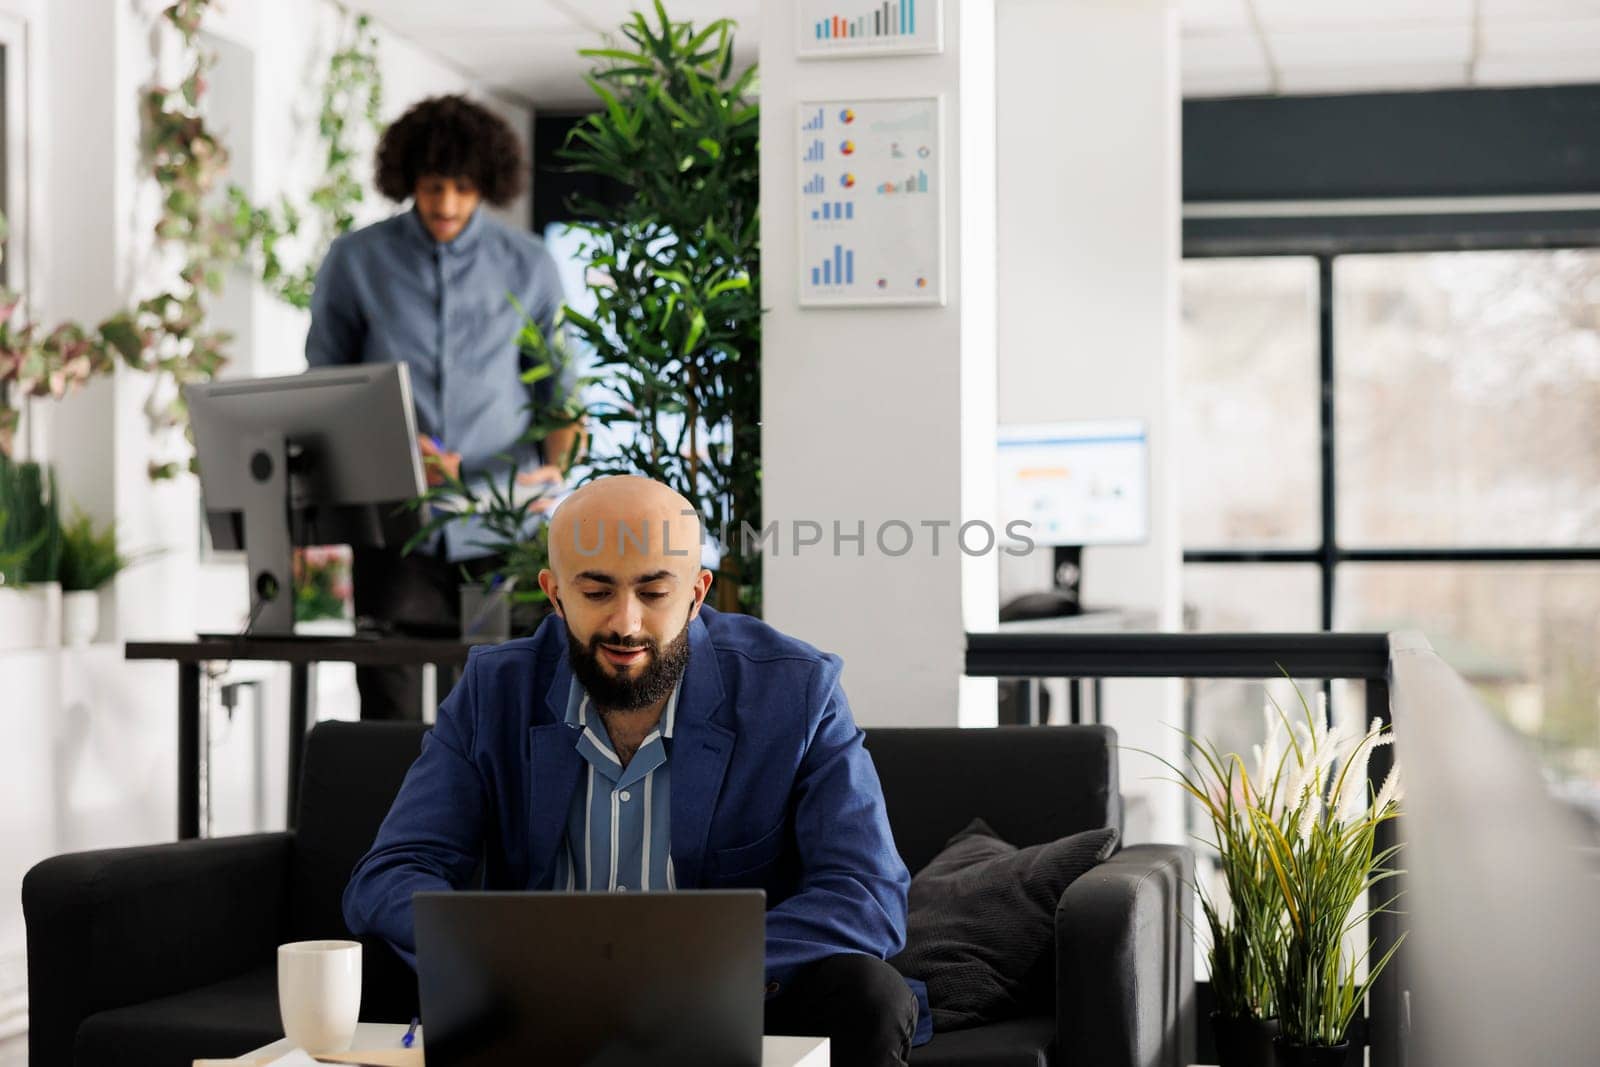 Arab company employee discussing start up in videocall with remote team in business office. Young man entrepreneur having online communication with coworkers using laptop in open space